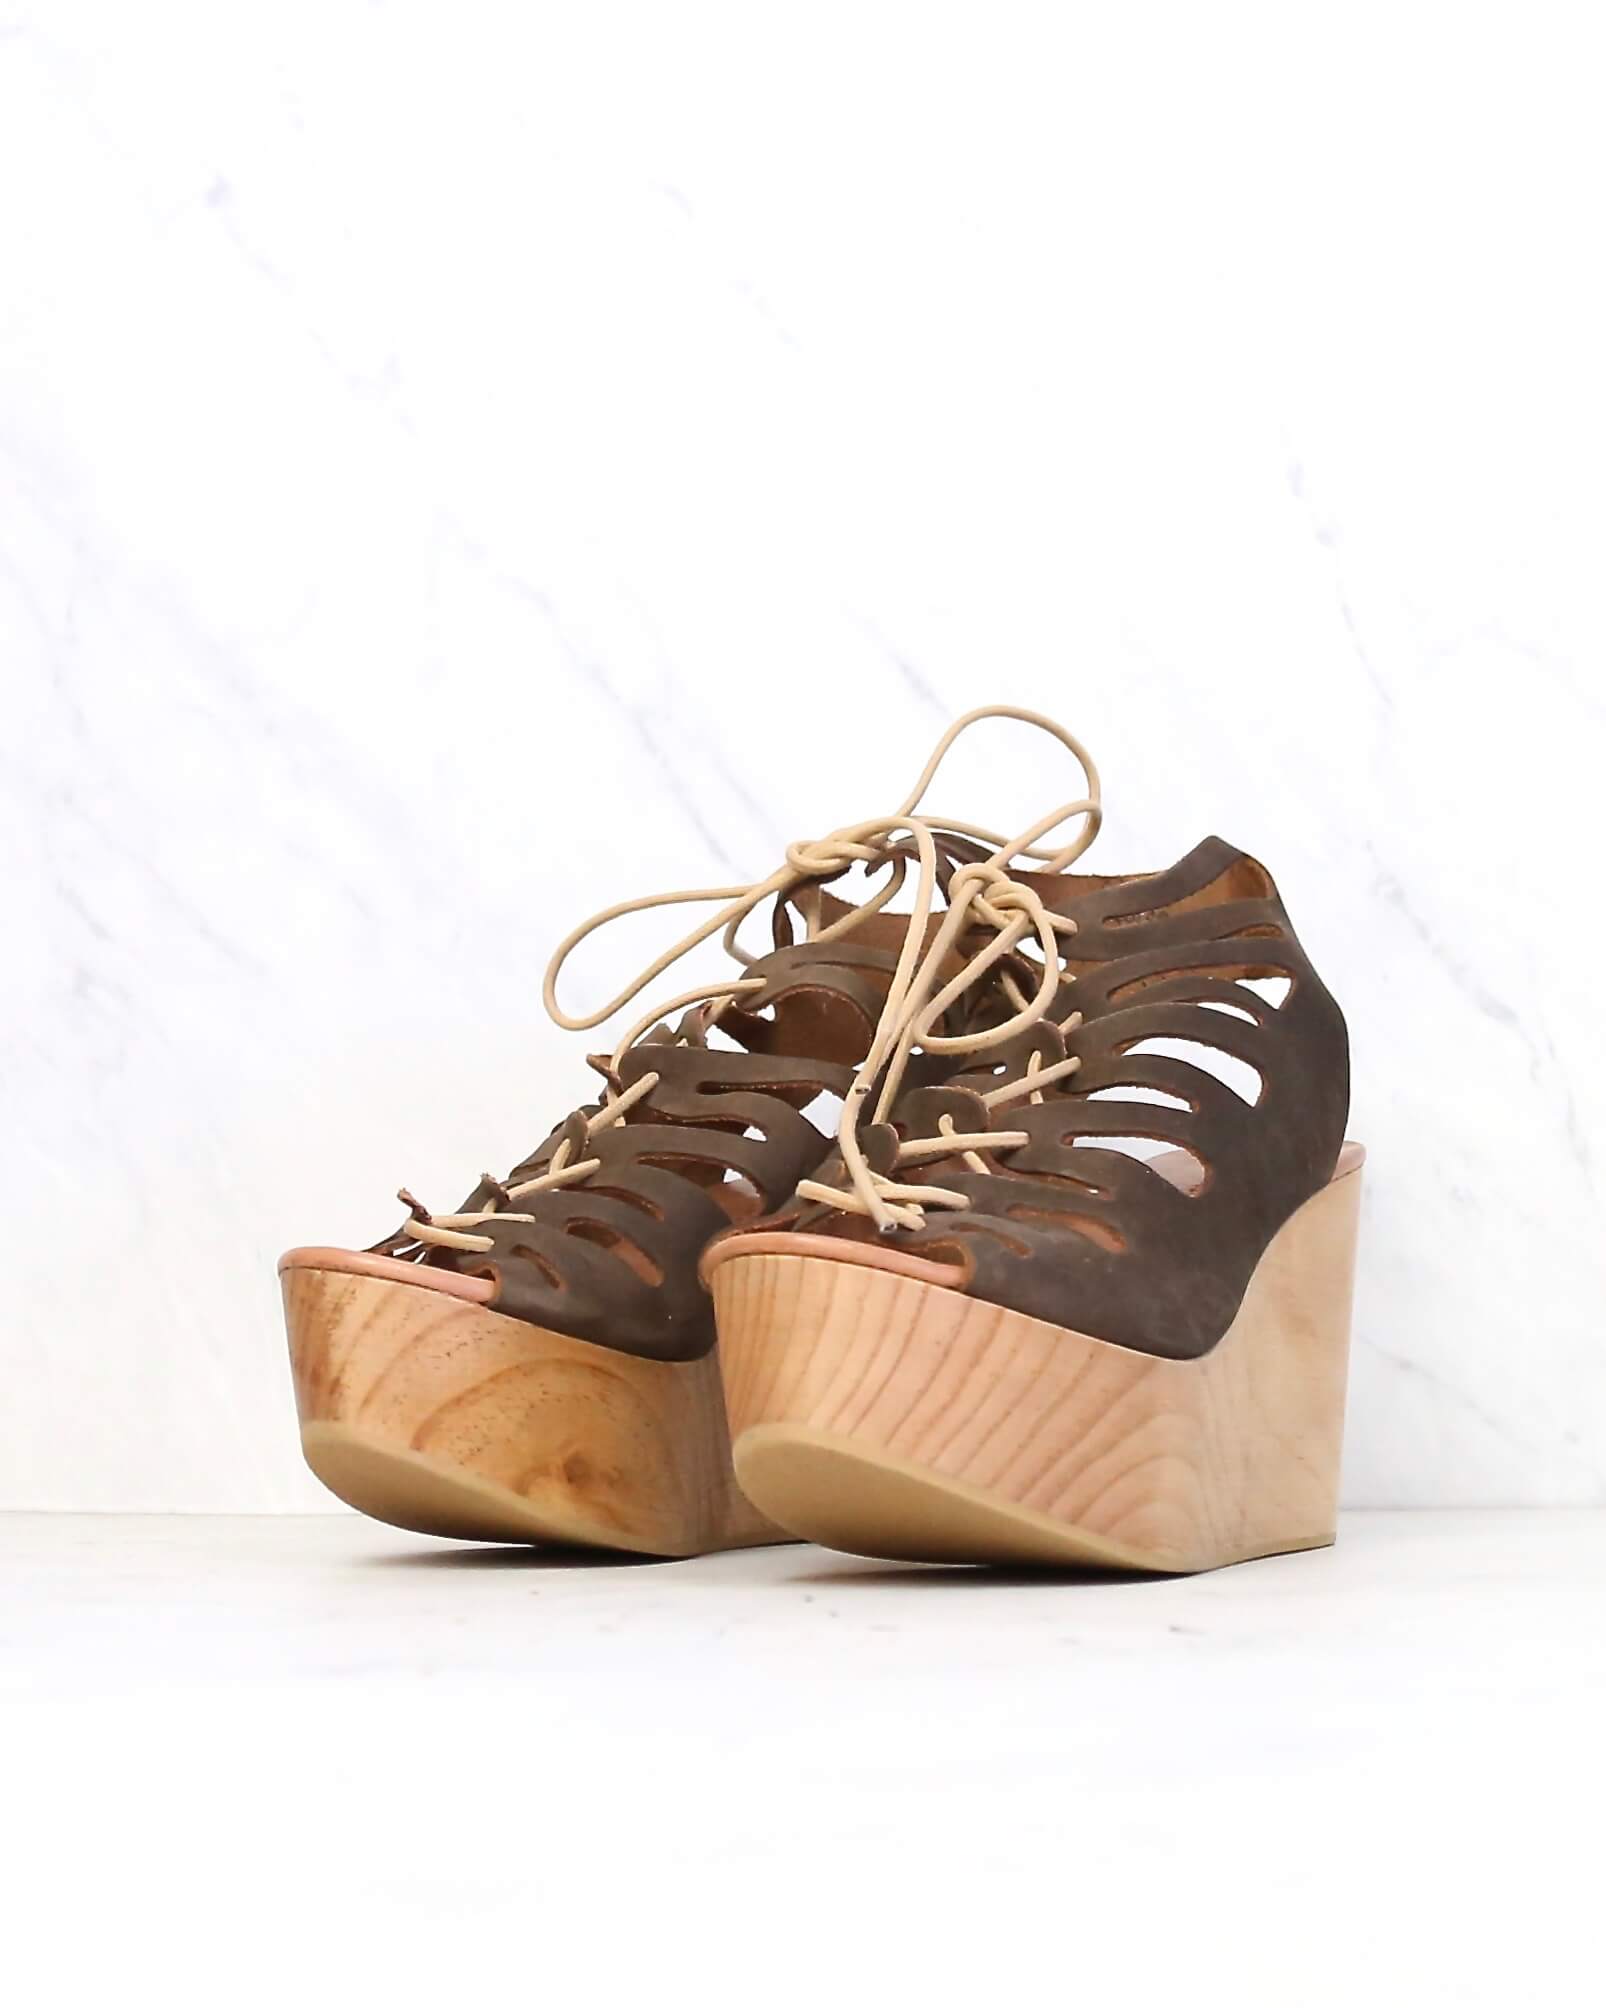 Musse \u0026 Cloud - Oneka Leather Lace Up 